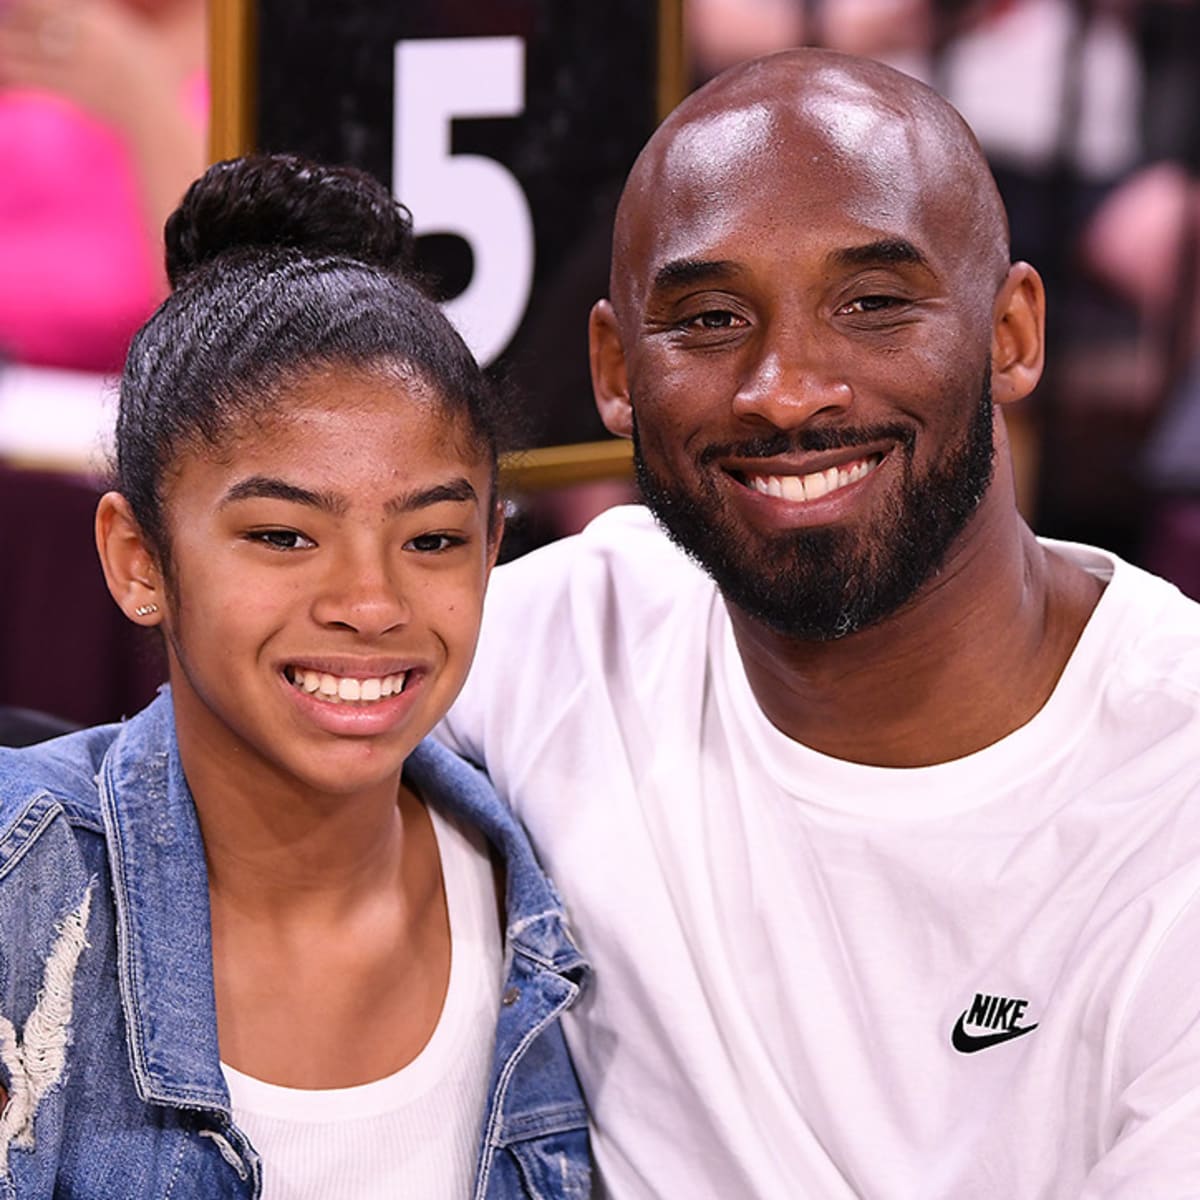 NBA will honour the numbers of Kobe, Gianna Bryant at All-Star weekend